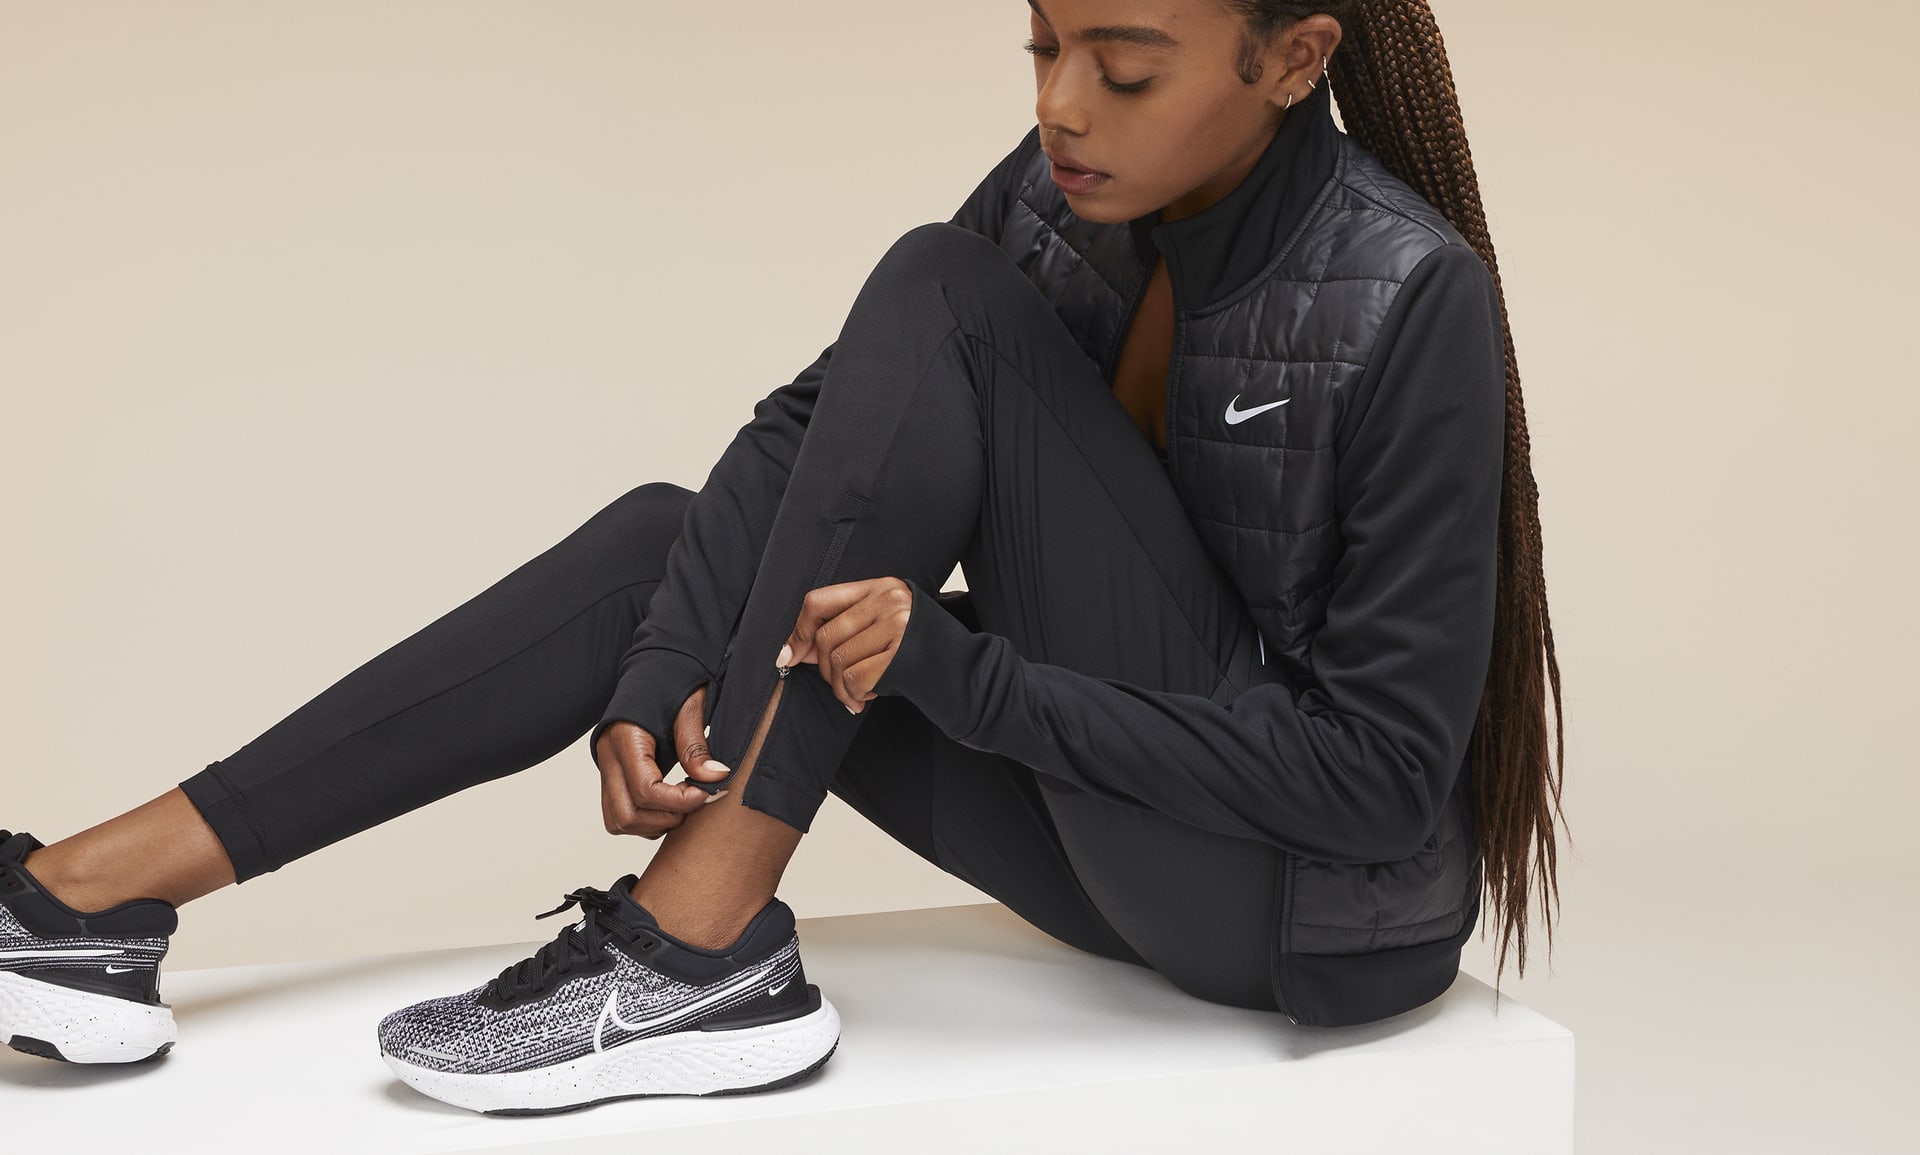 Stay comfortable and stylish with Nike Dri Fit Sweats for Women